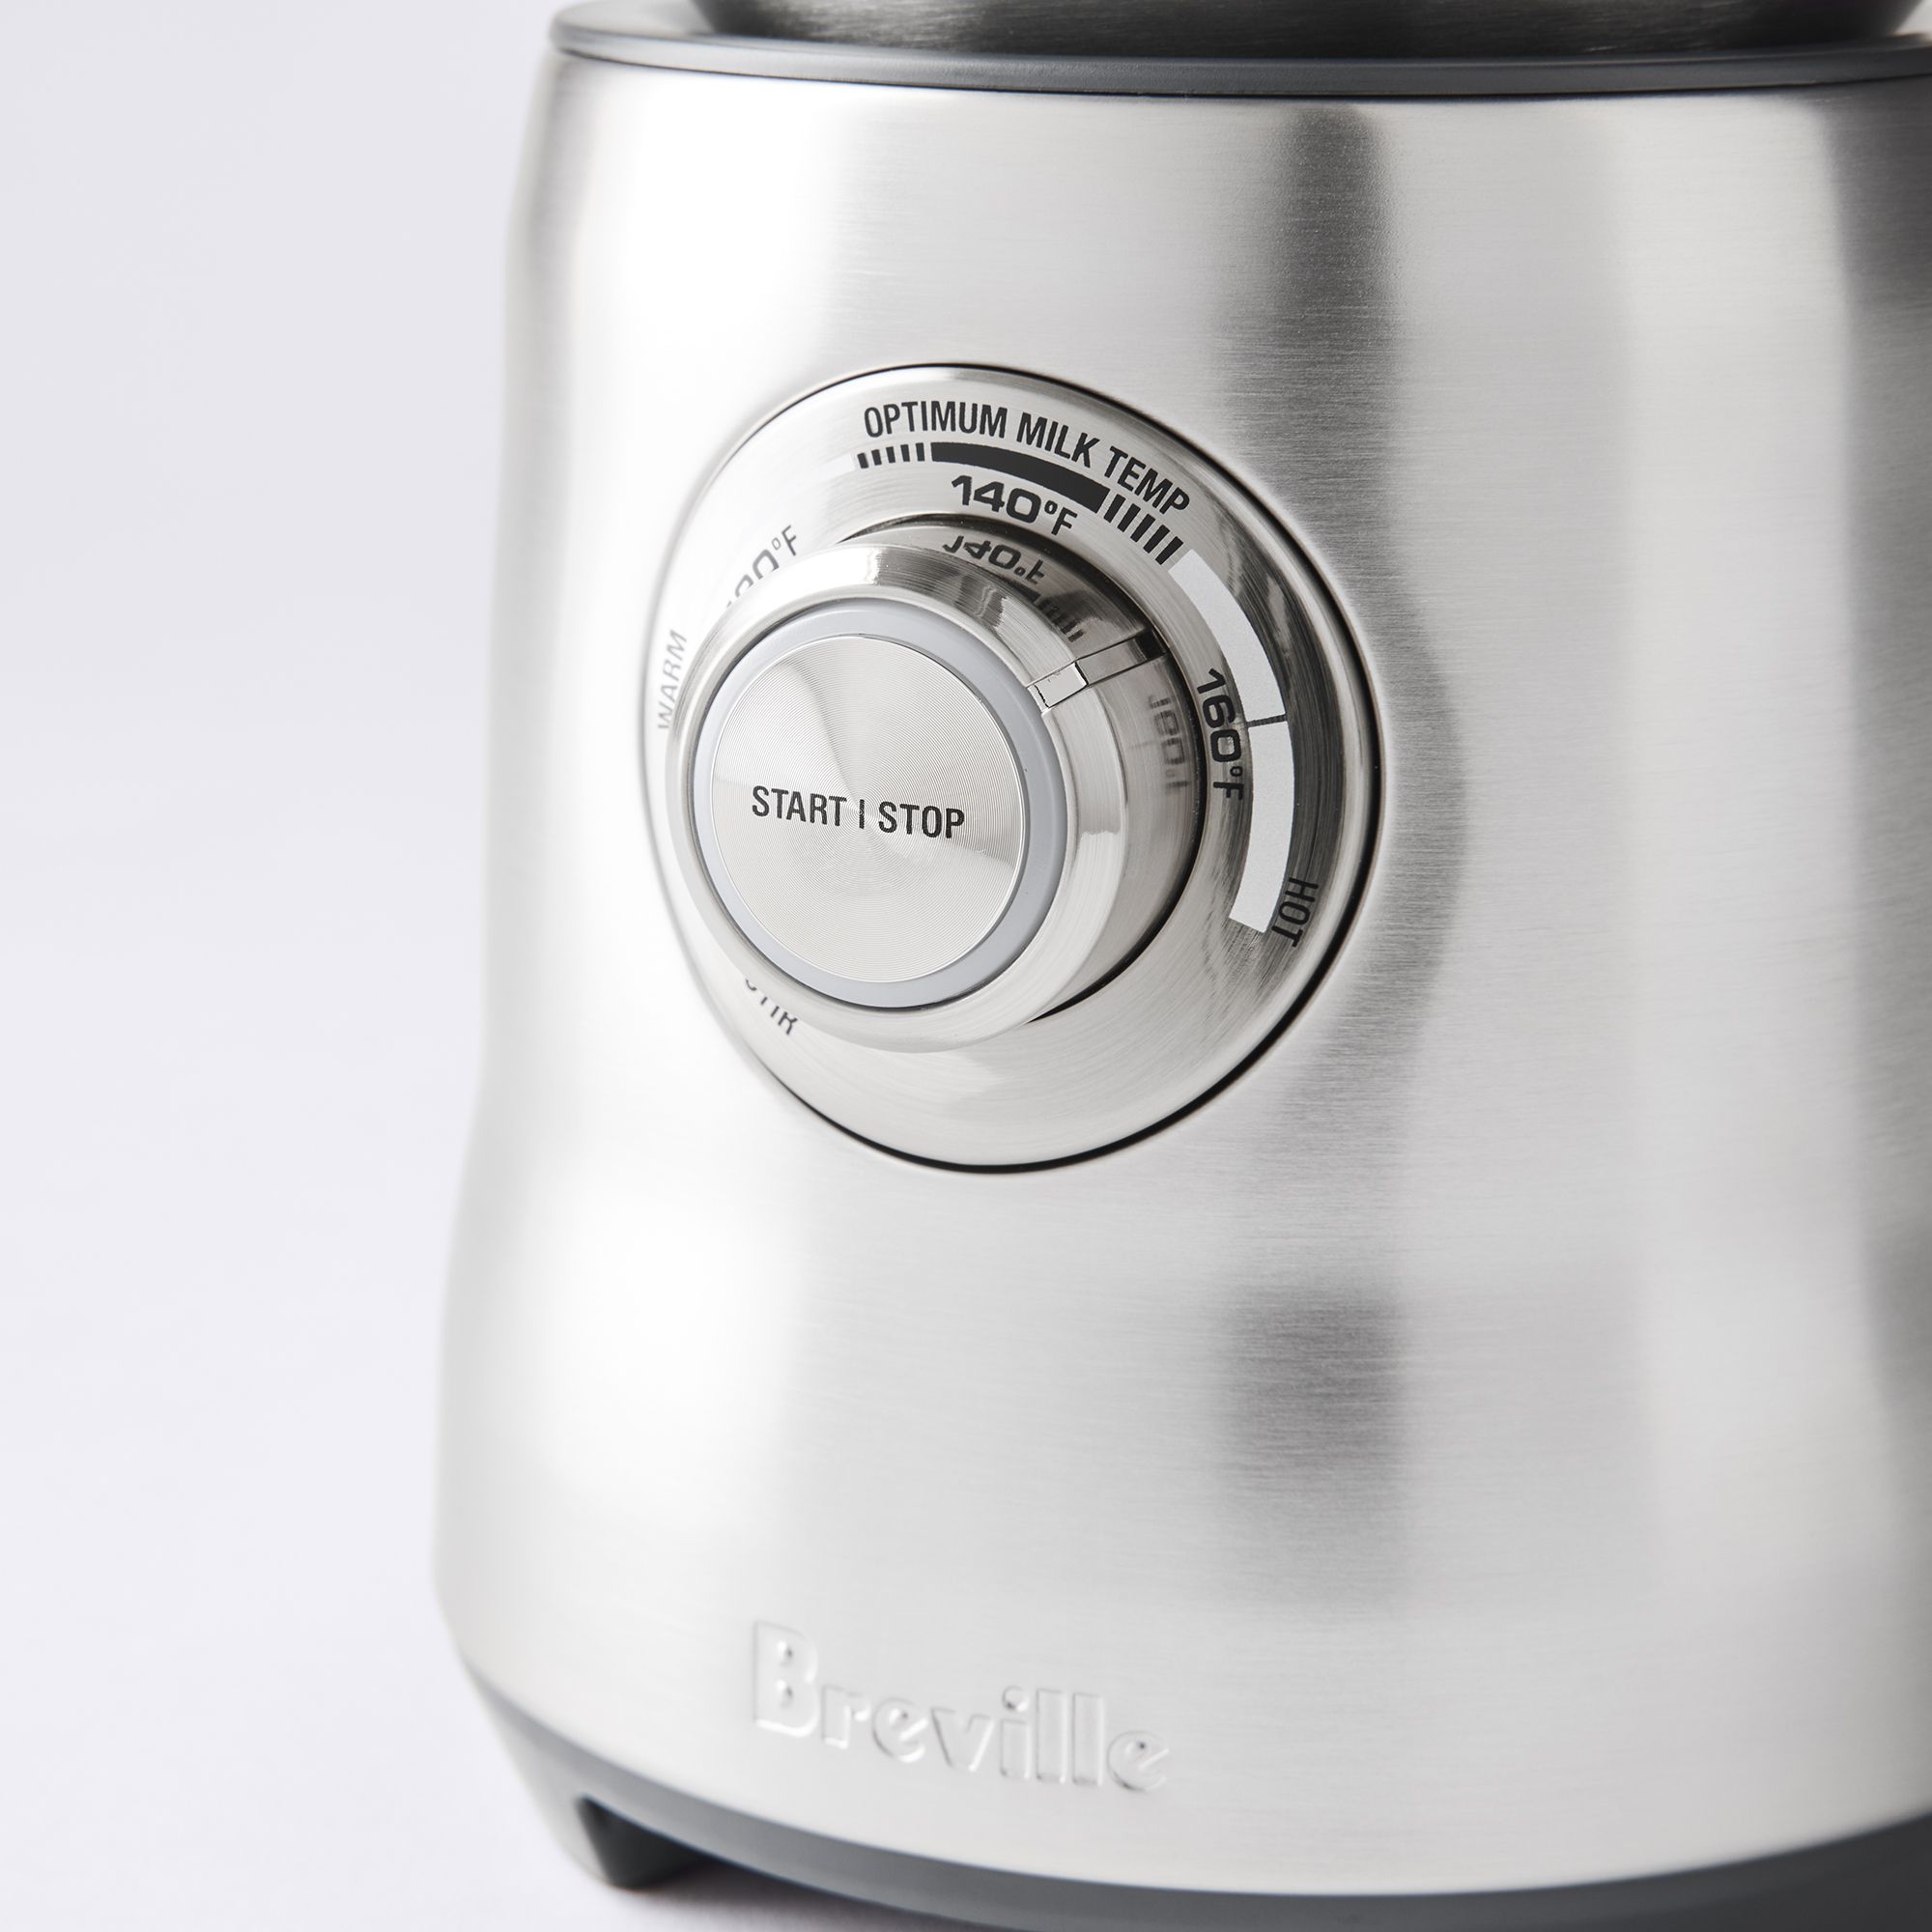 Exclusive Review: Breville Milk Café Electric Frother 